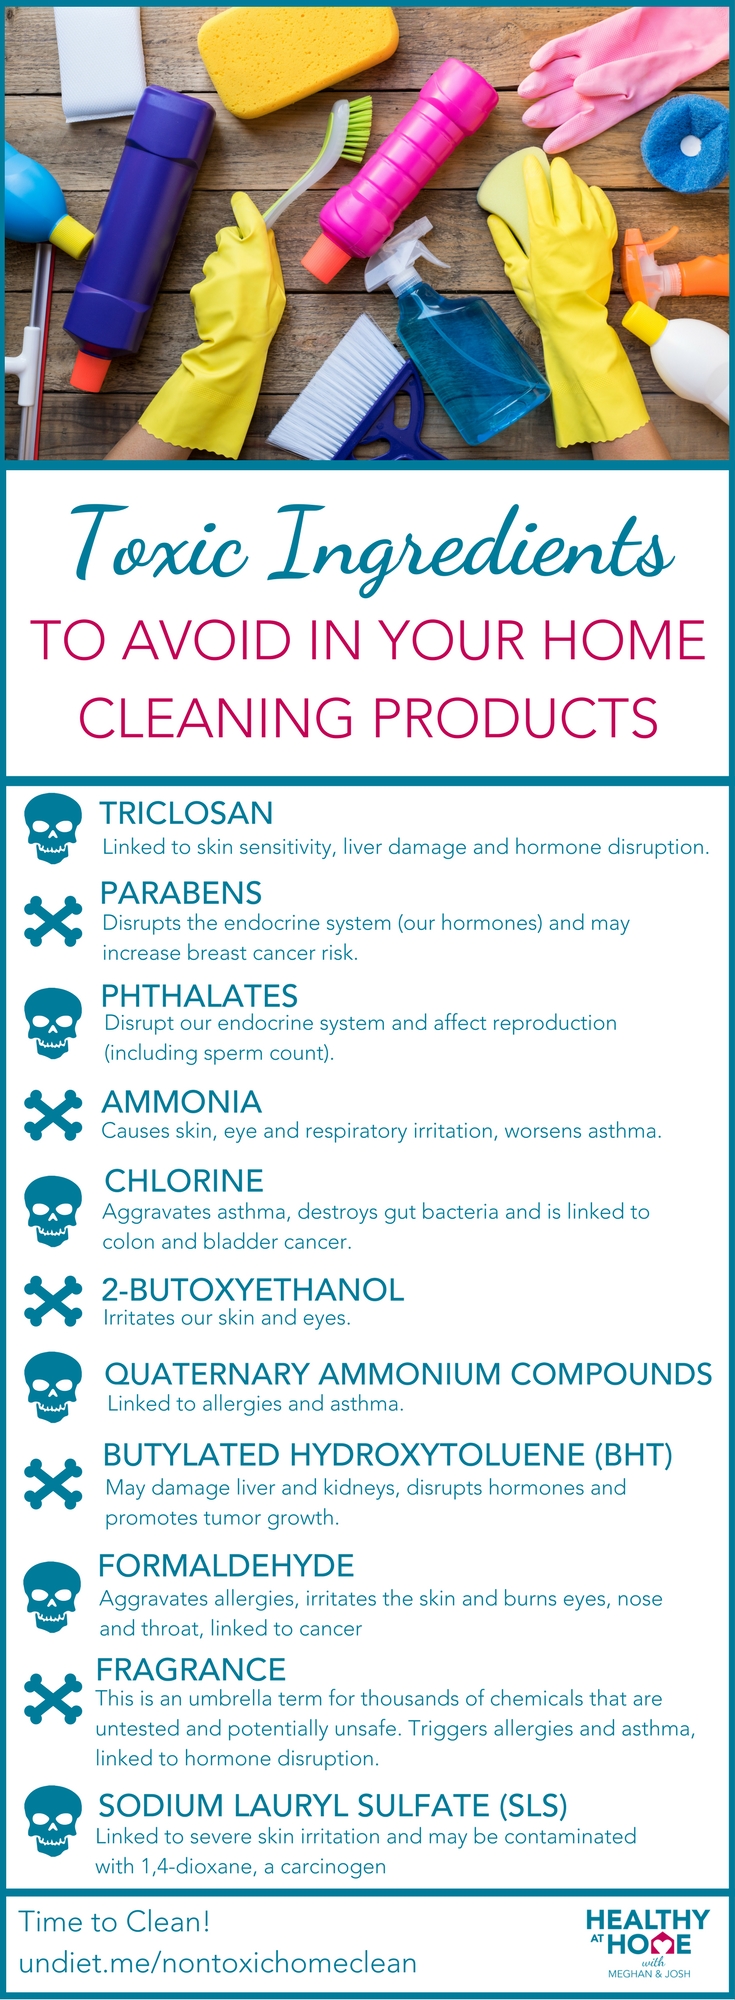 Toxic Ingredients to avoid in your home cleaning products